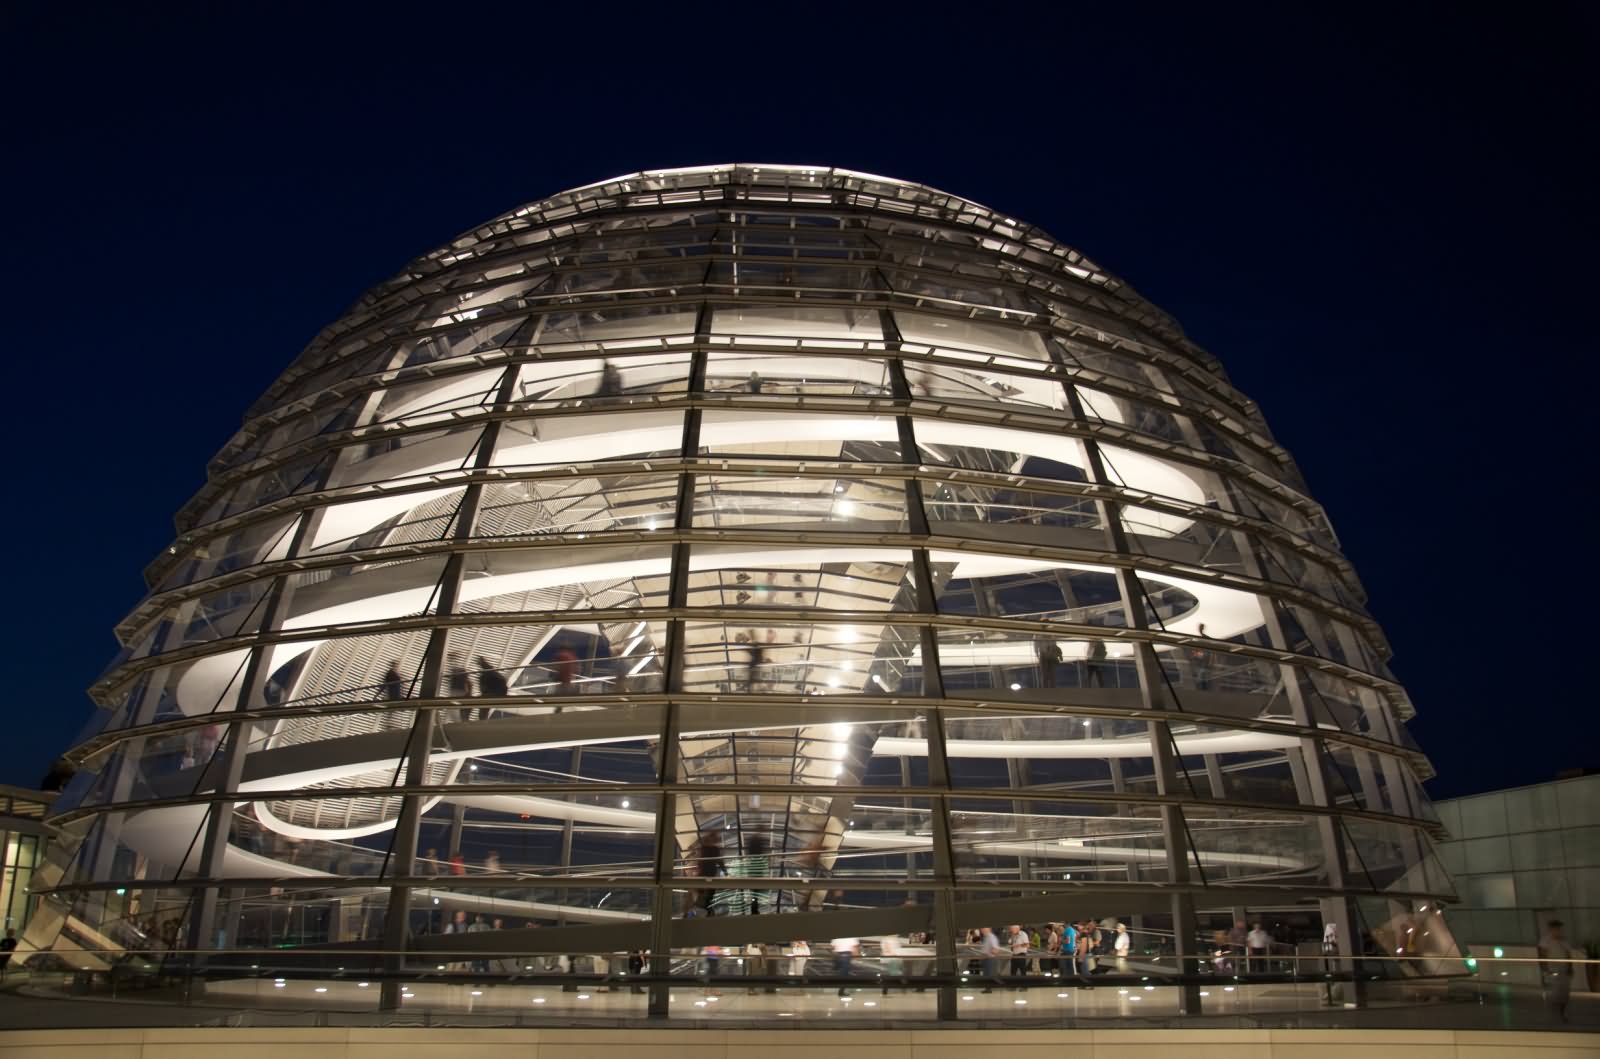 Beautiful Dome Of Reichstag Building During Night Picture